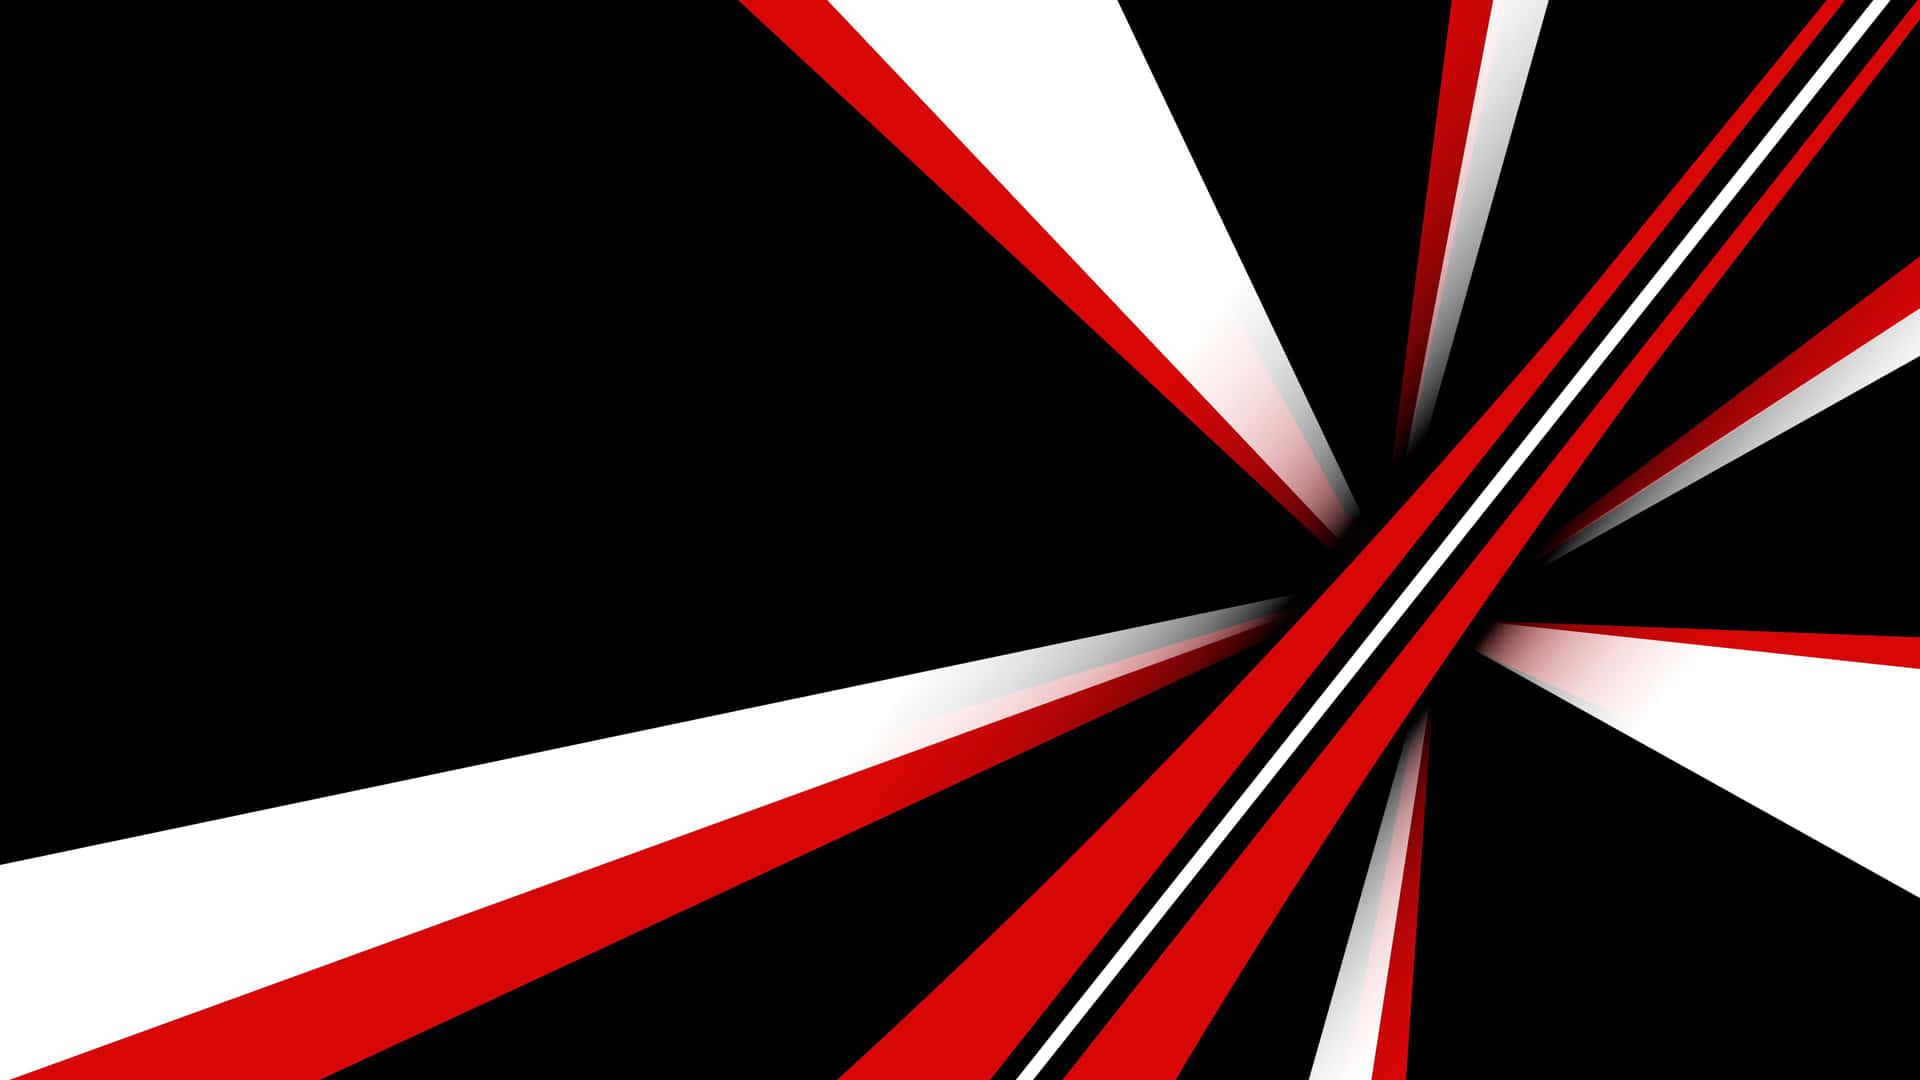 Download A beautiful abstract image in black white and red Wallpaper   Wallpaperscom